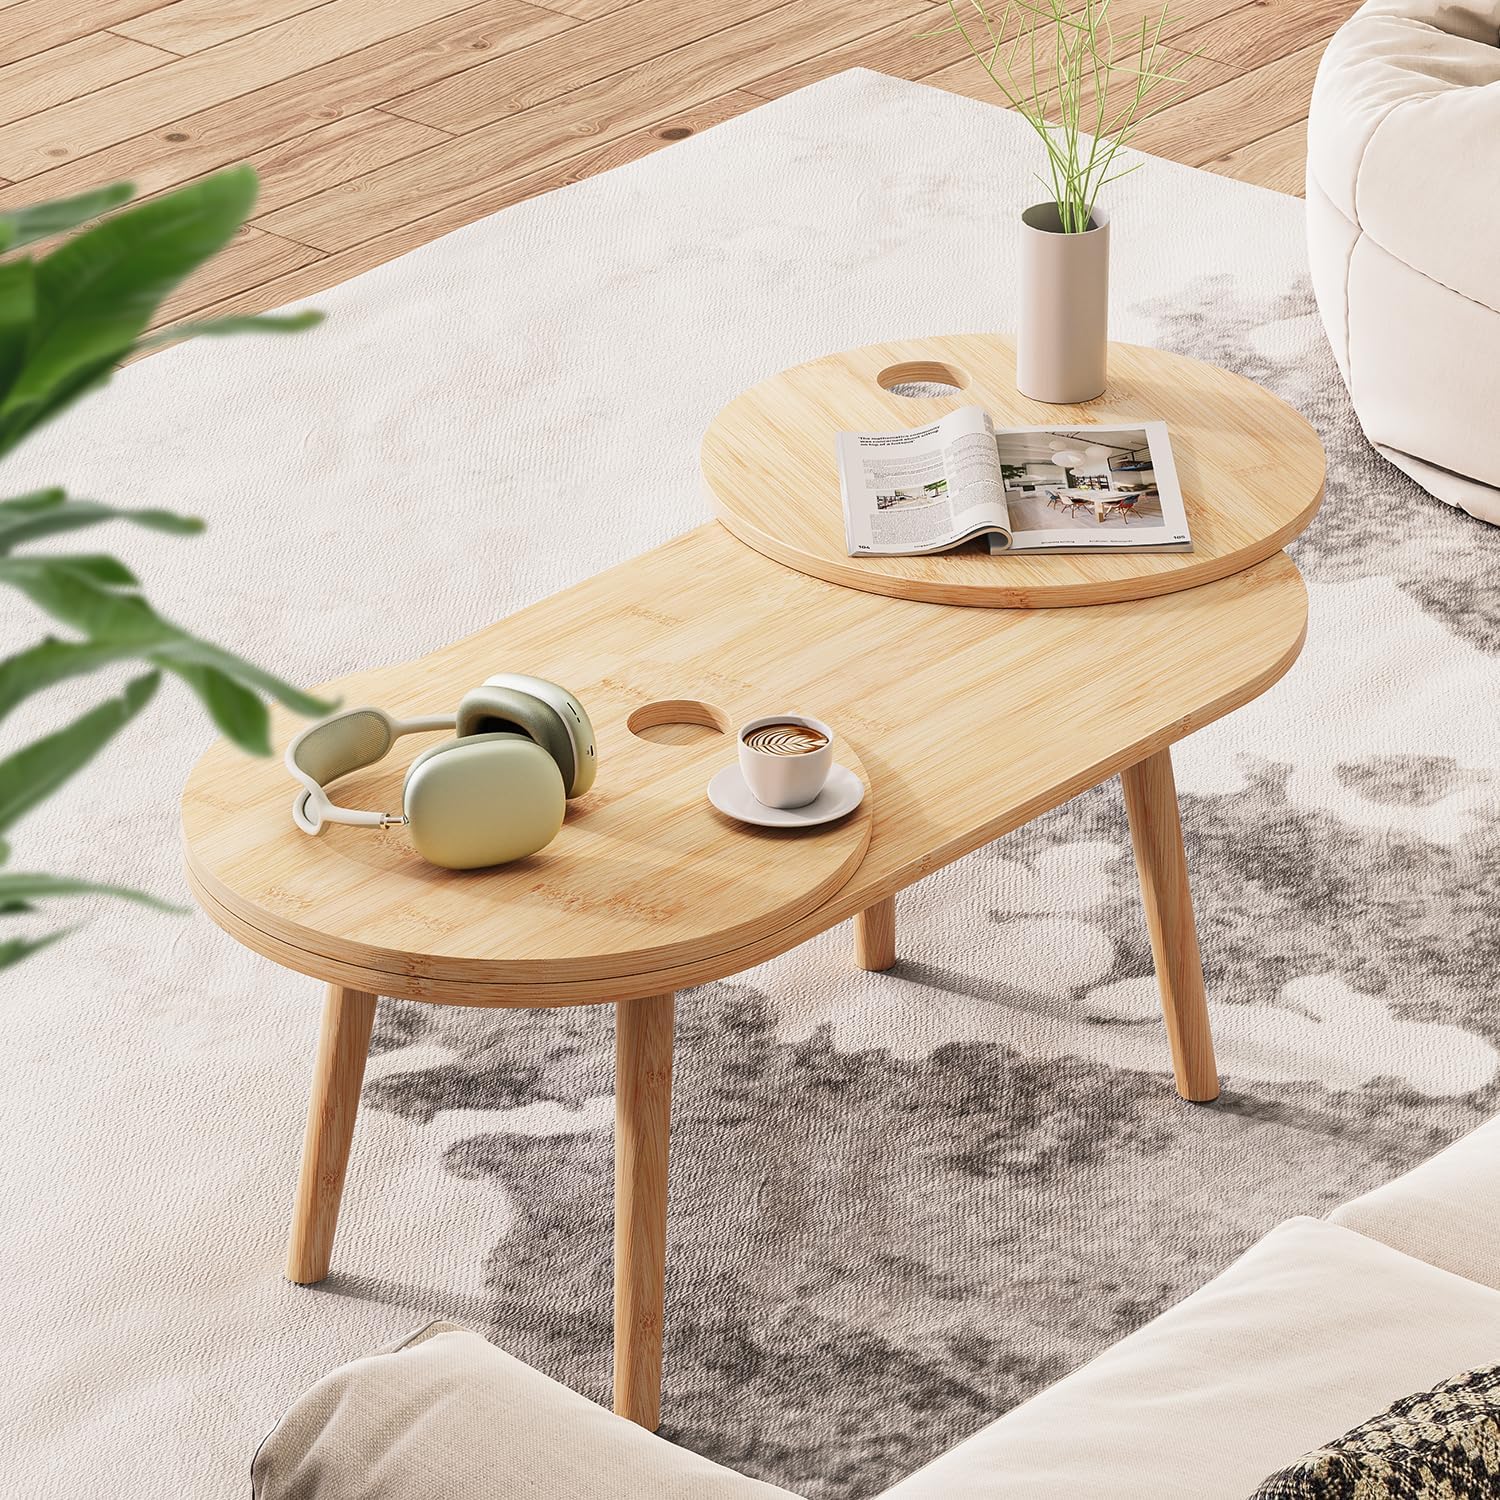 Yunerz Unique Bamboo Coffee Table